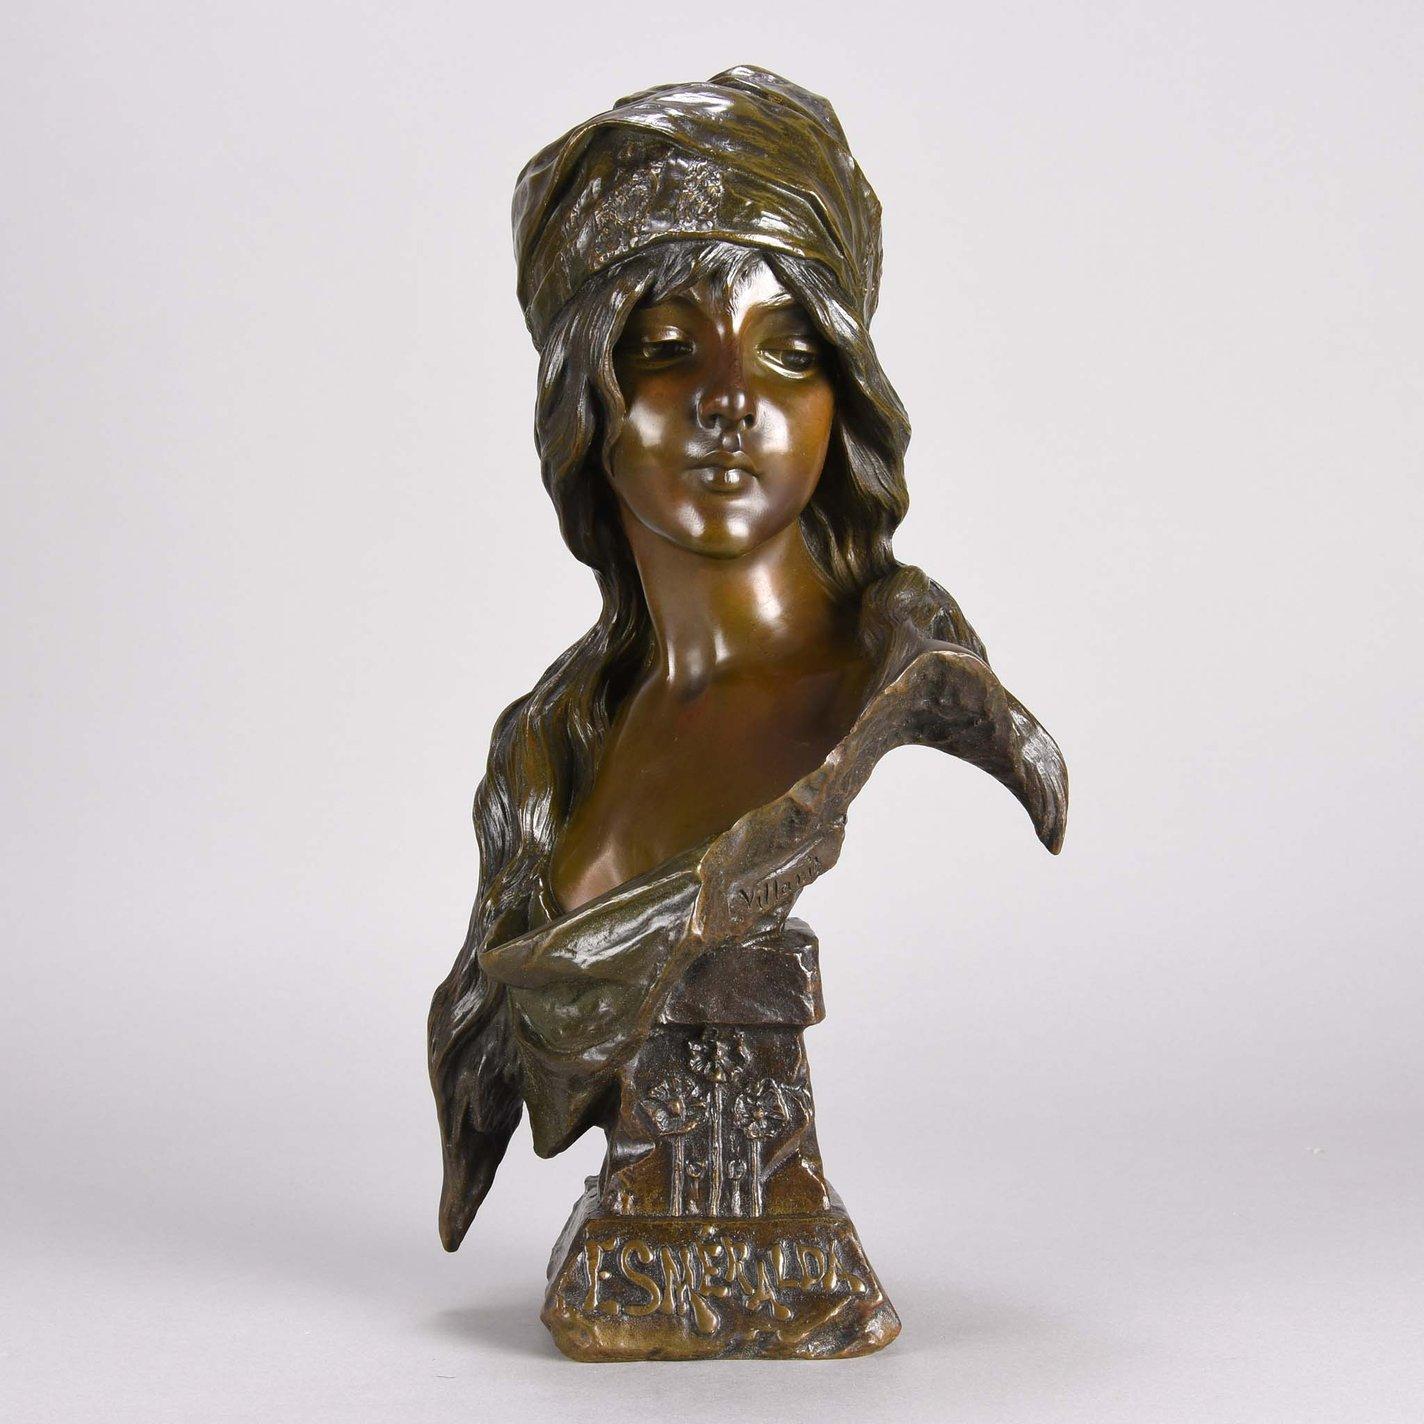 An attractive late 19th century French Art Nouveau bronze bust of a young beauty with a look of deep contemplation on her face with excellent hand finished surface detail and very fine rich brown variegated patina. Titled, signed E Villanis and